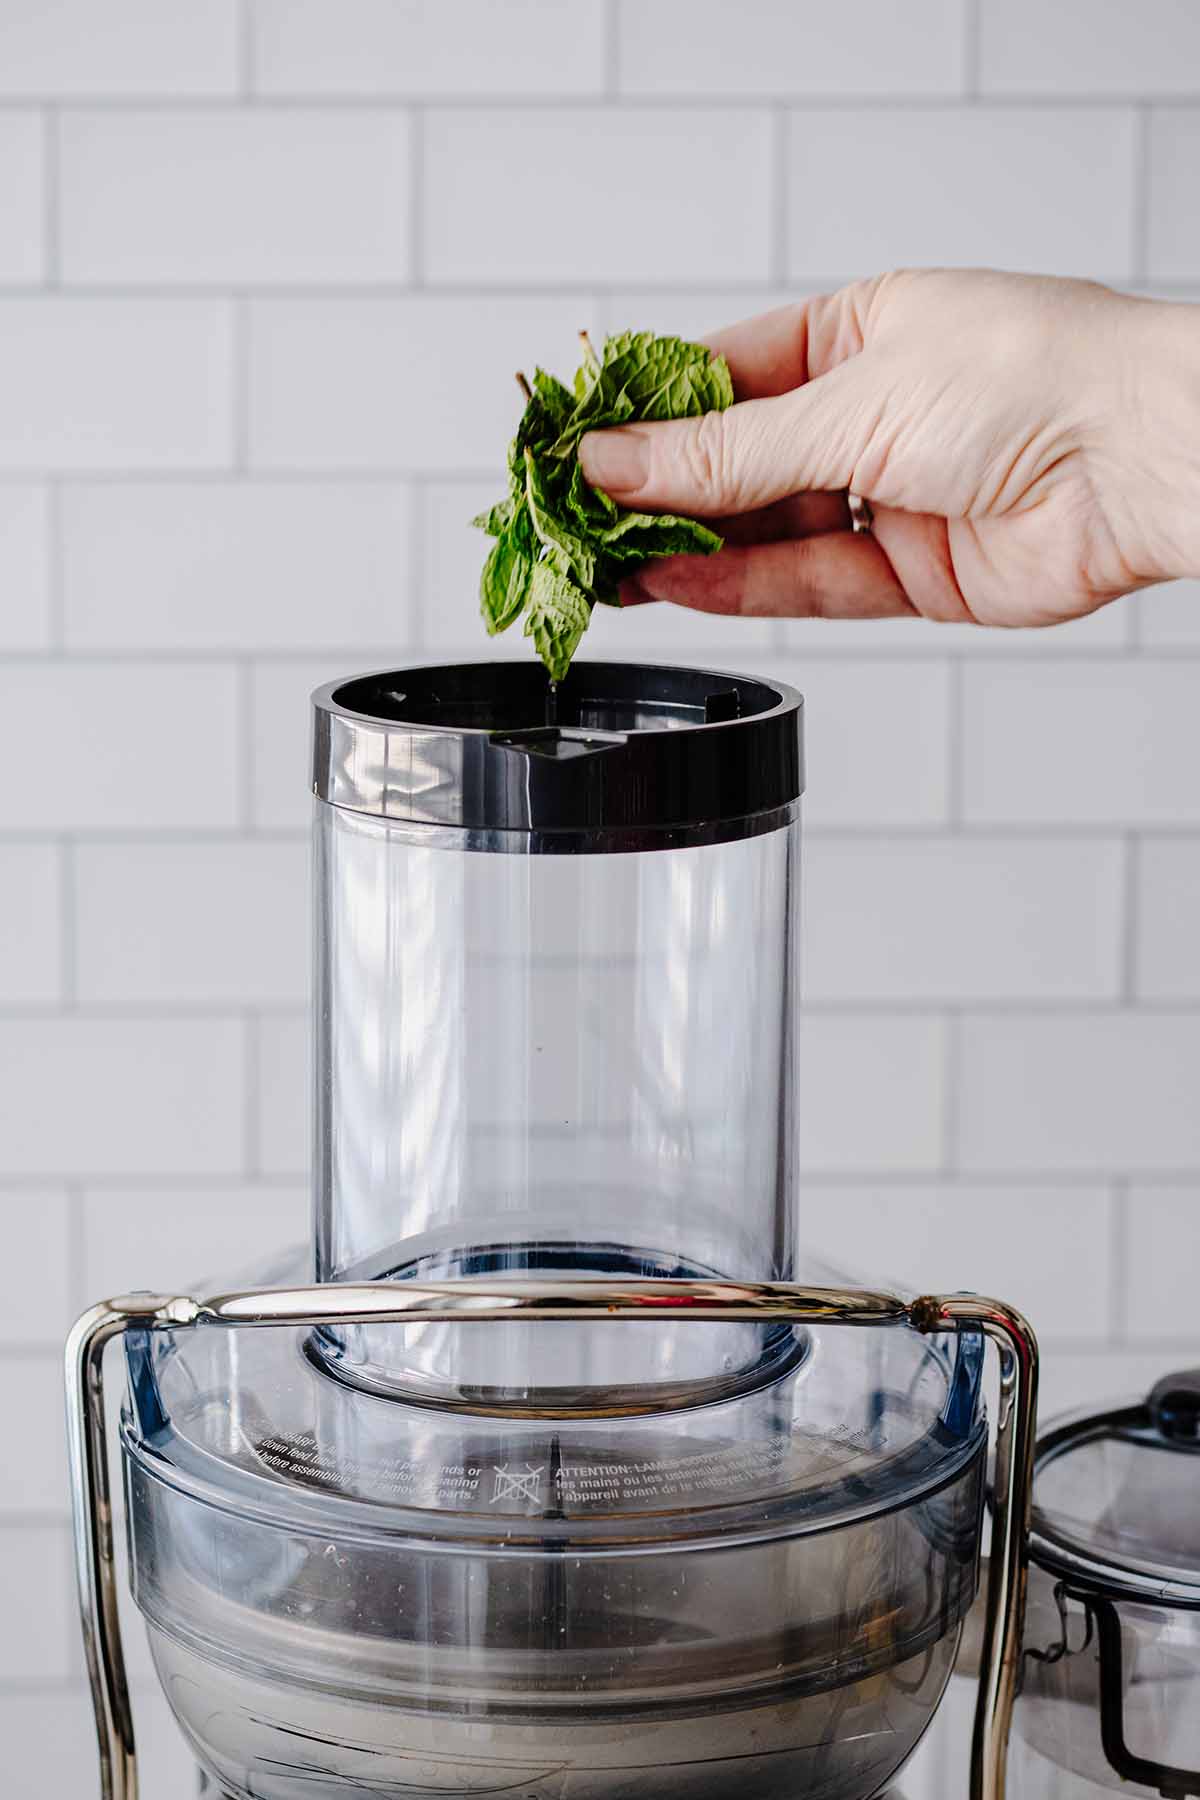 Fresh mint leaves being added to the chute of a juice extractor.